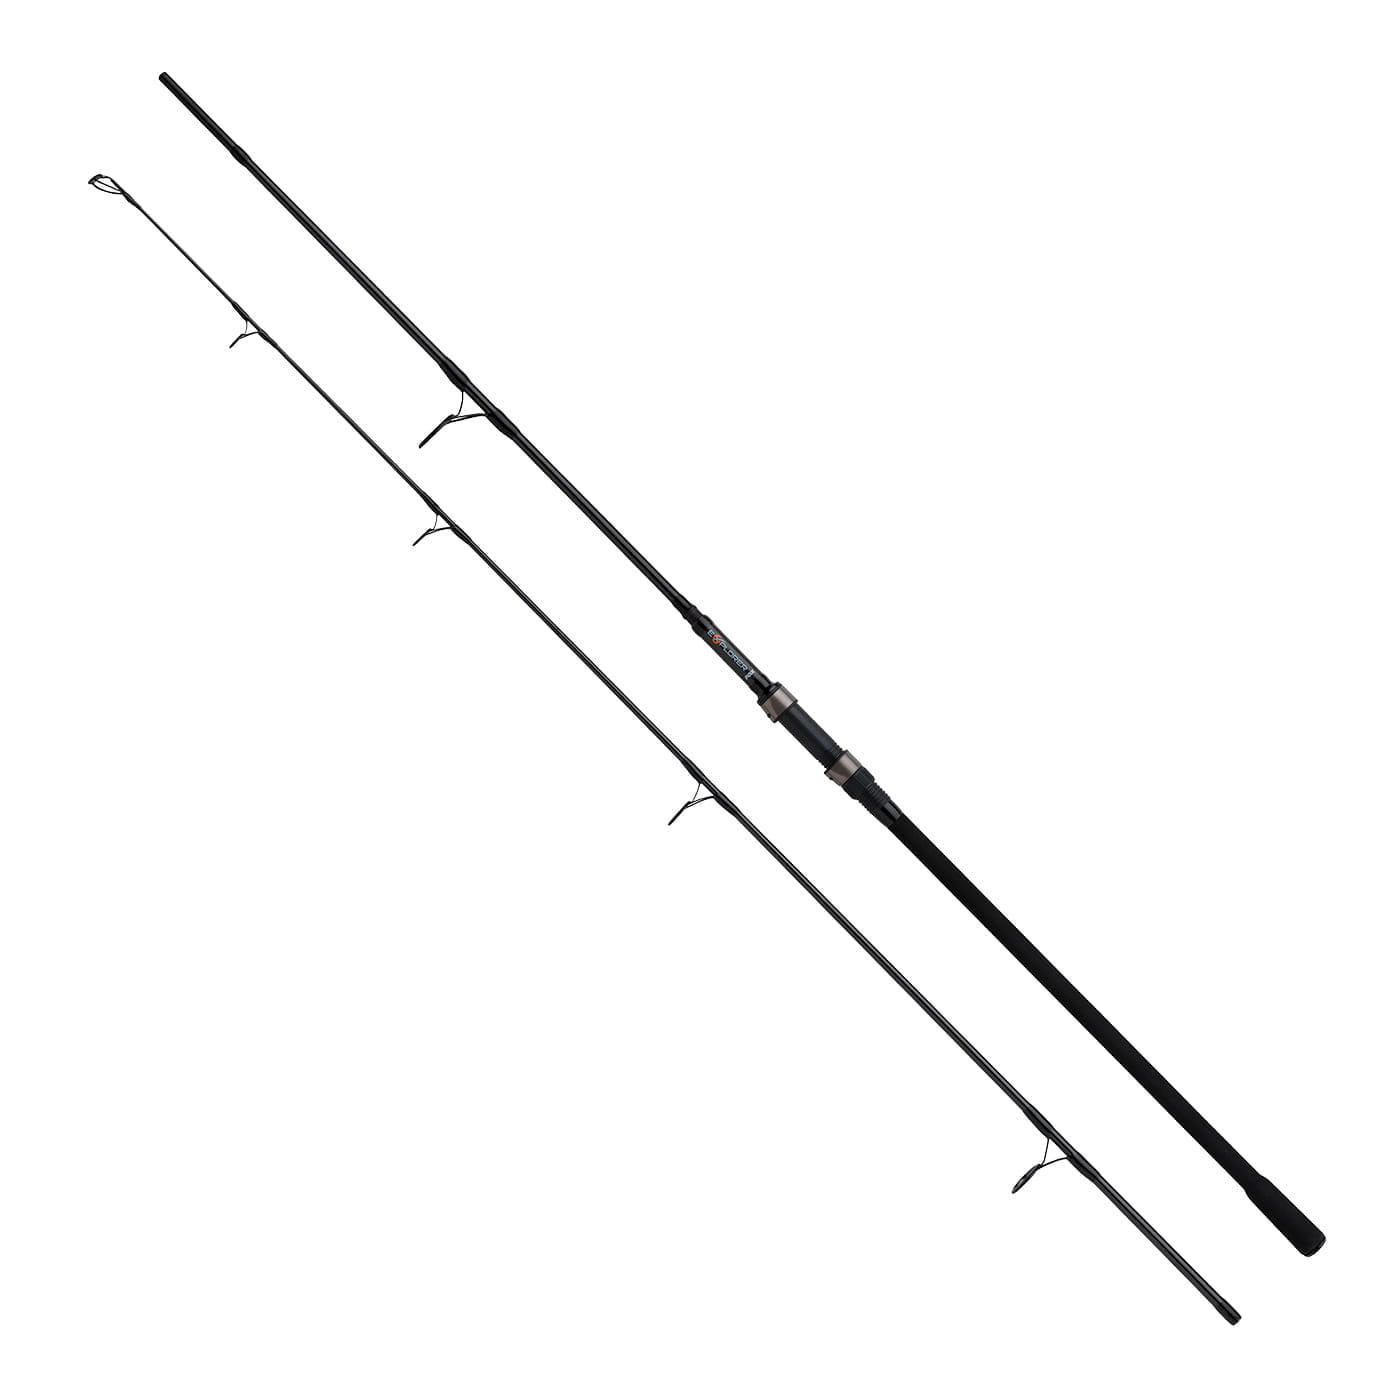 Travel Rods for your fishing adventures